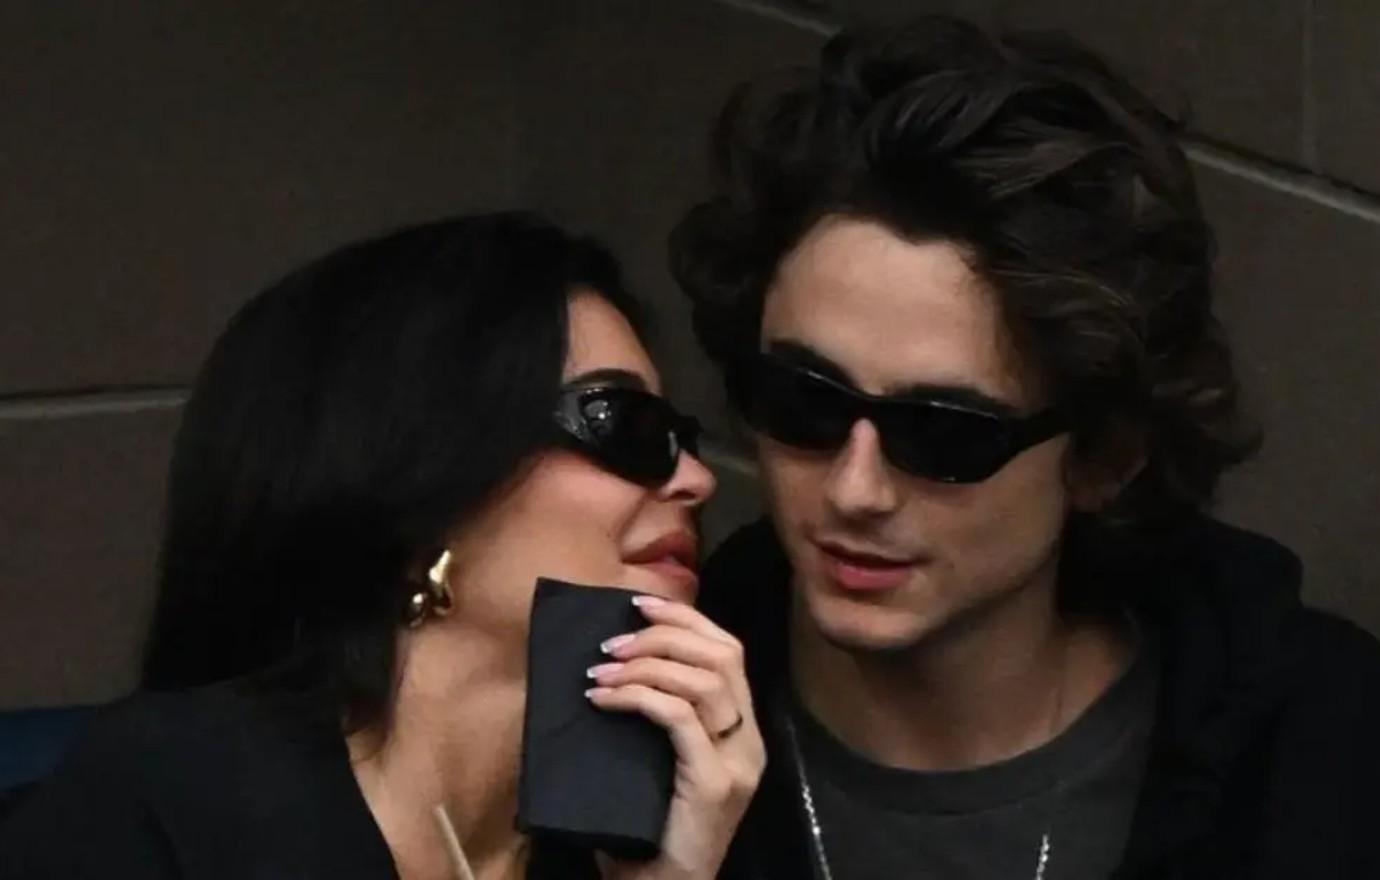 Kylie Jenner Wears One Heck Of A Meaningful Ring Amid Timothée